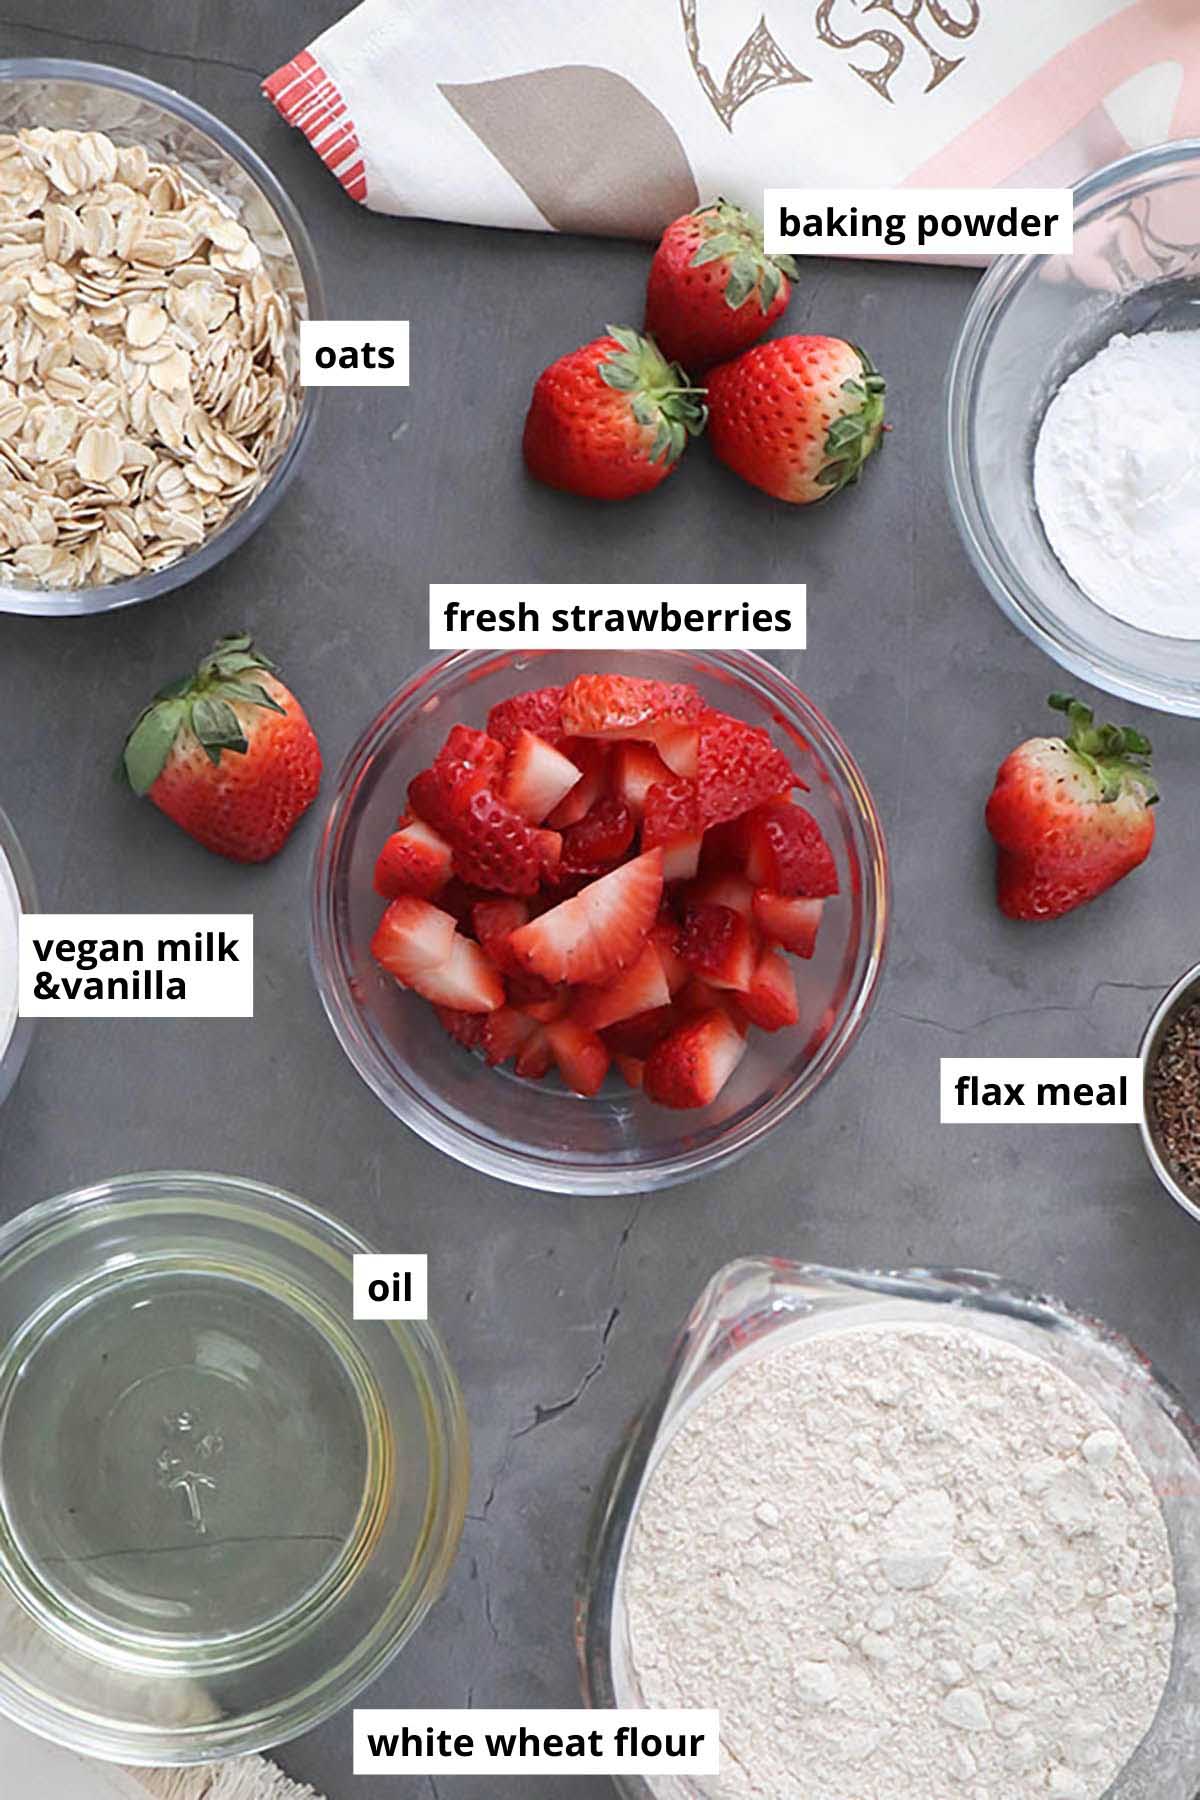 oats, strawberries, and other muffin ingredients in bowls on a slate table